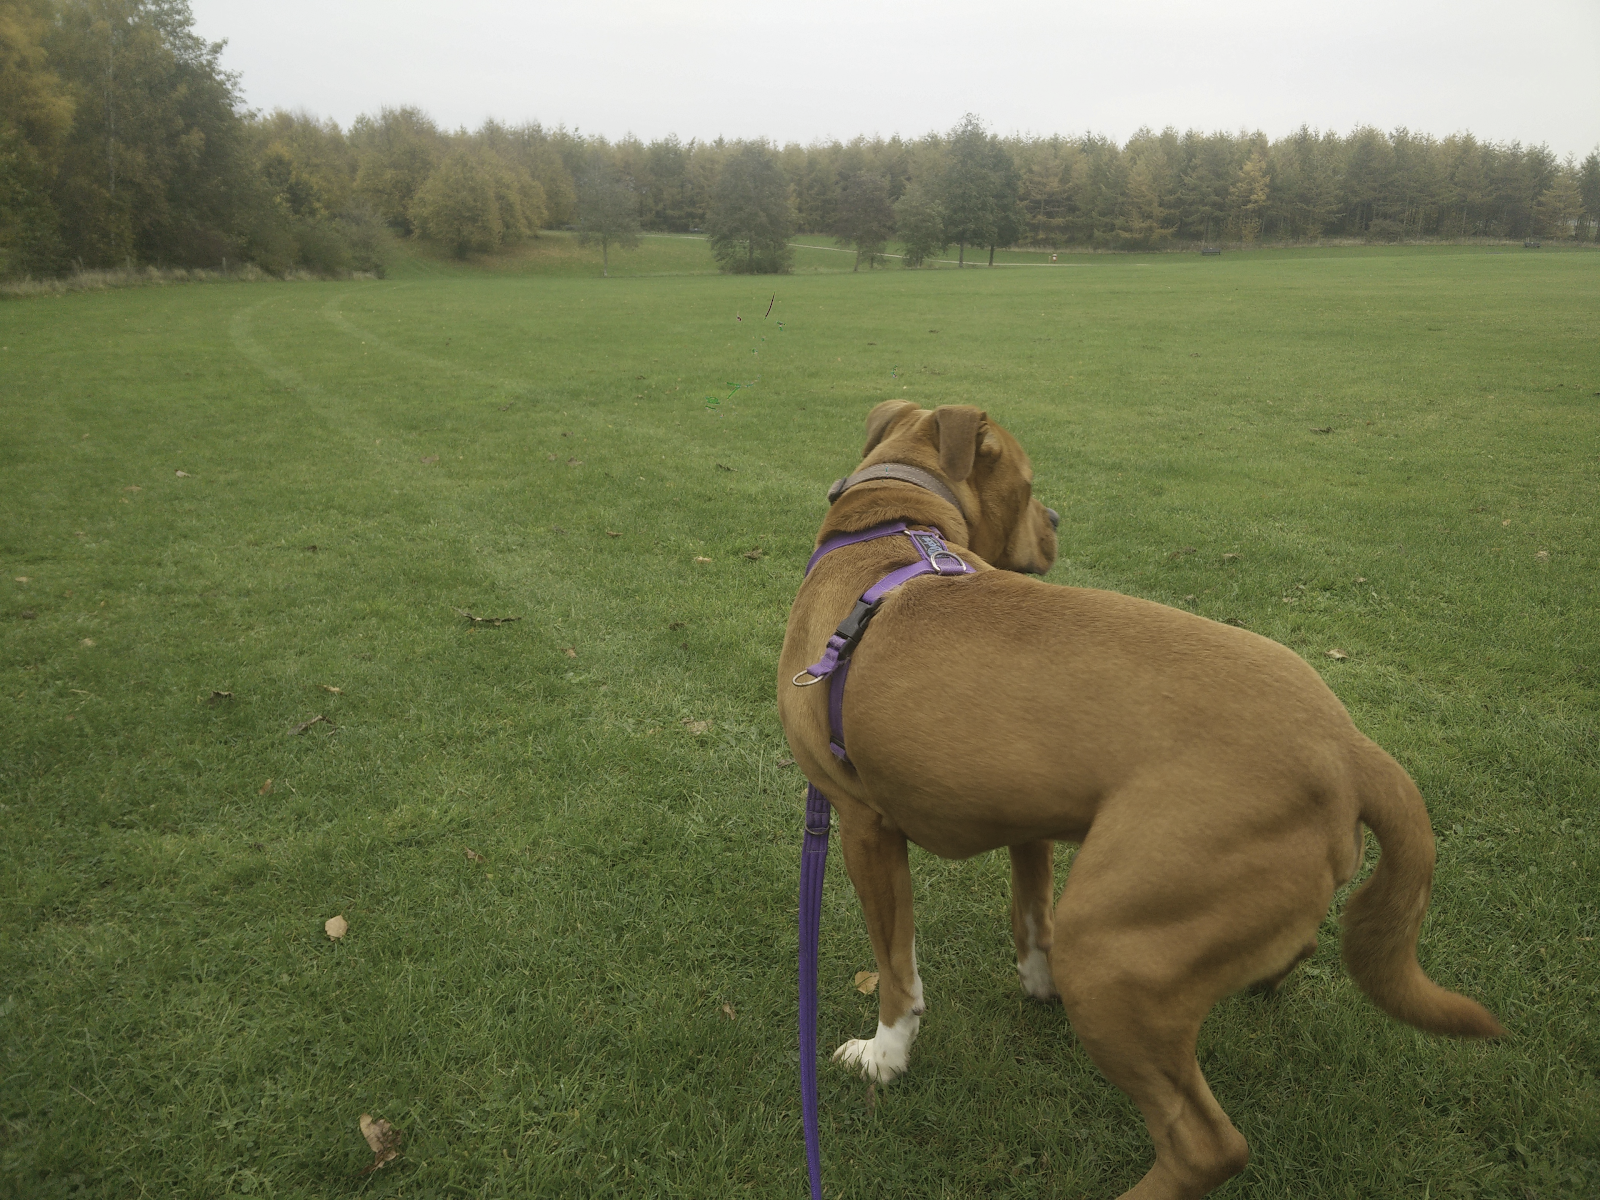 A picture showing a staffy type dog, ears are held back, body posture and tail are lowered, muscles are tense and he is leaning backwards. The dog may escalate to barking.